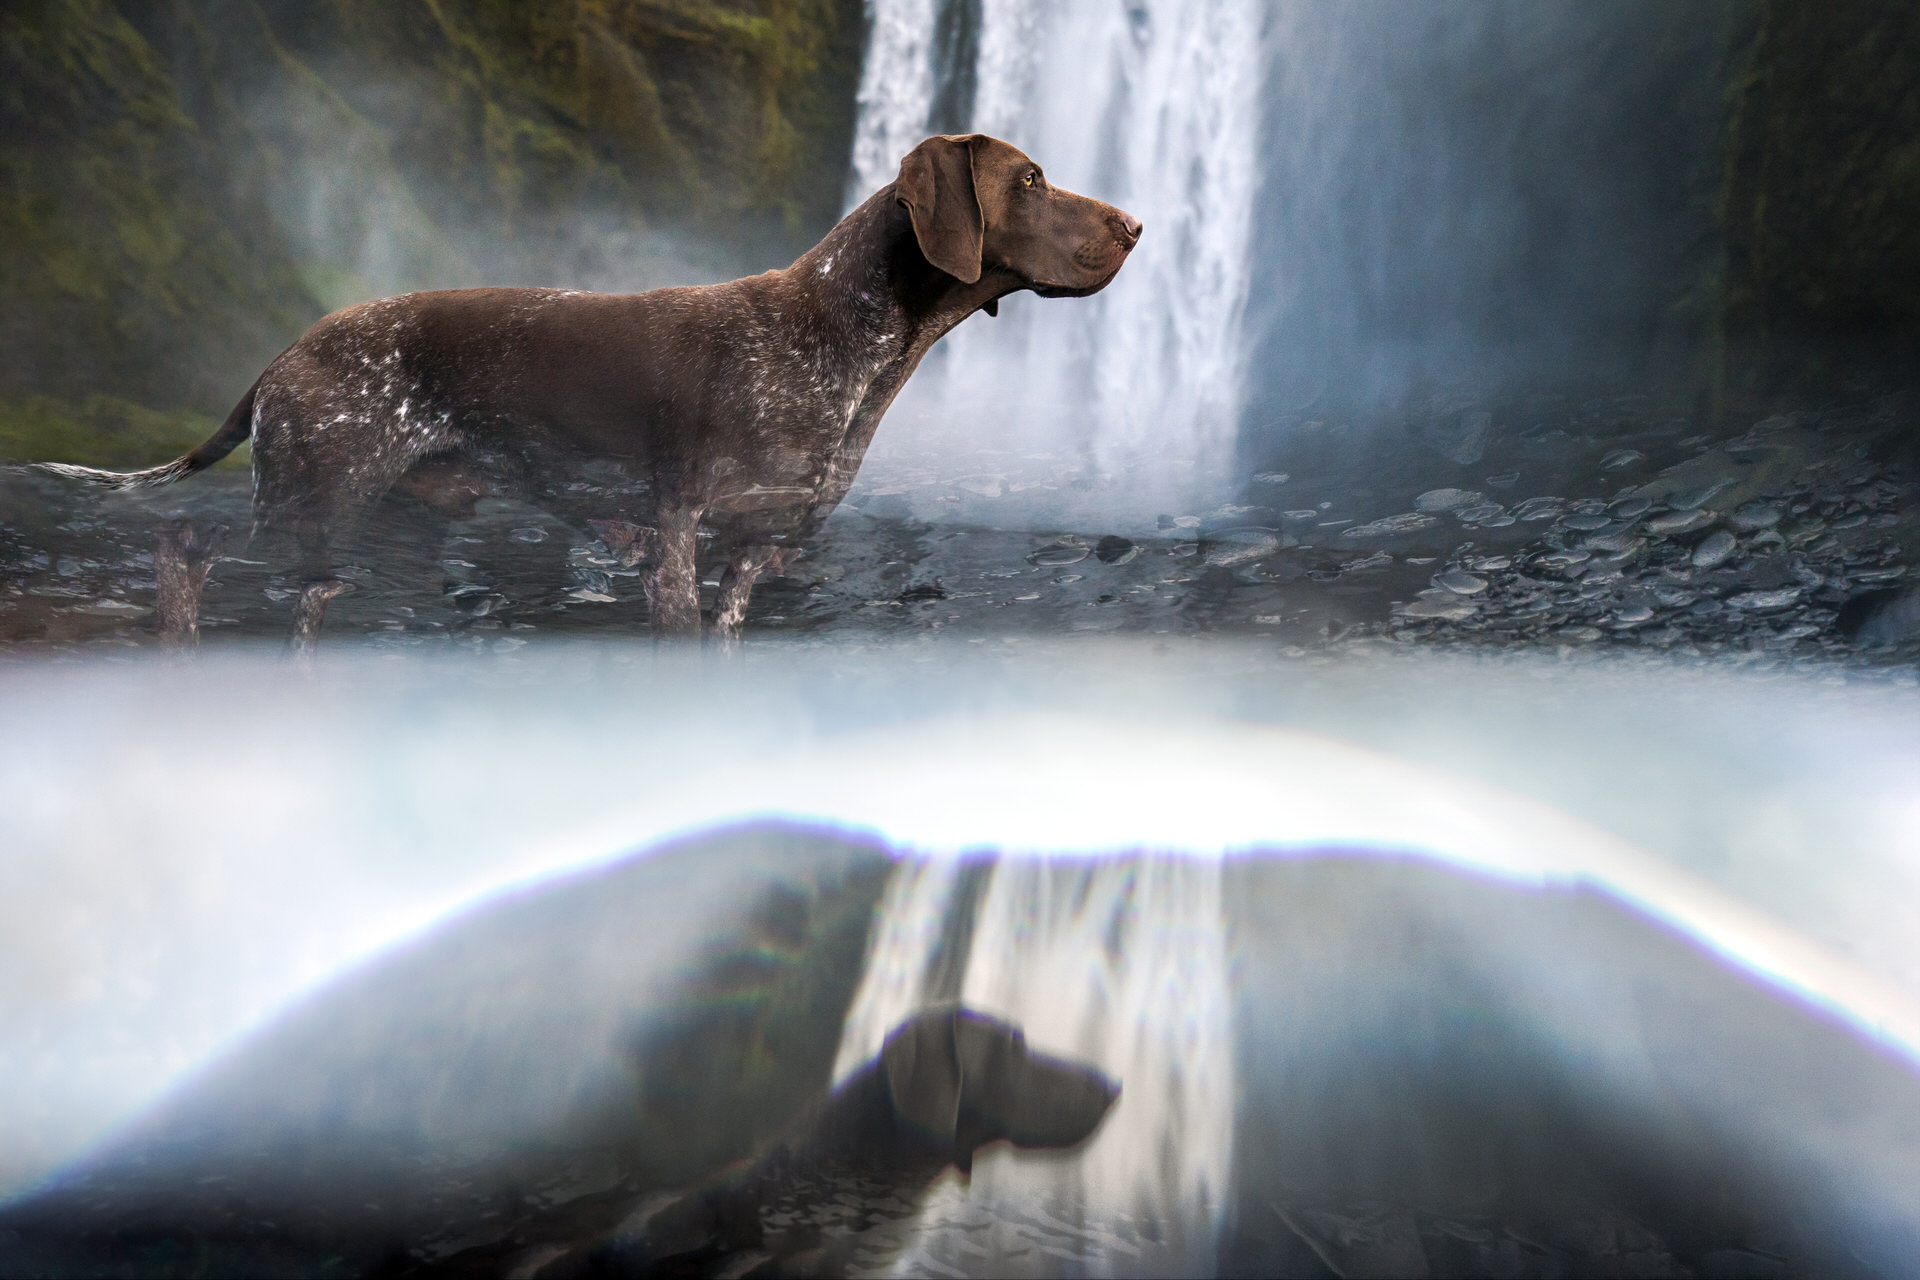 Brown dog near misty waterfall with rainbow reflection at Skógafoss in Iceland